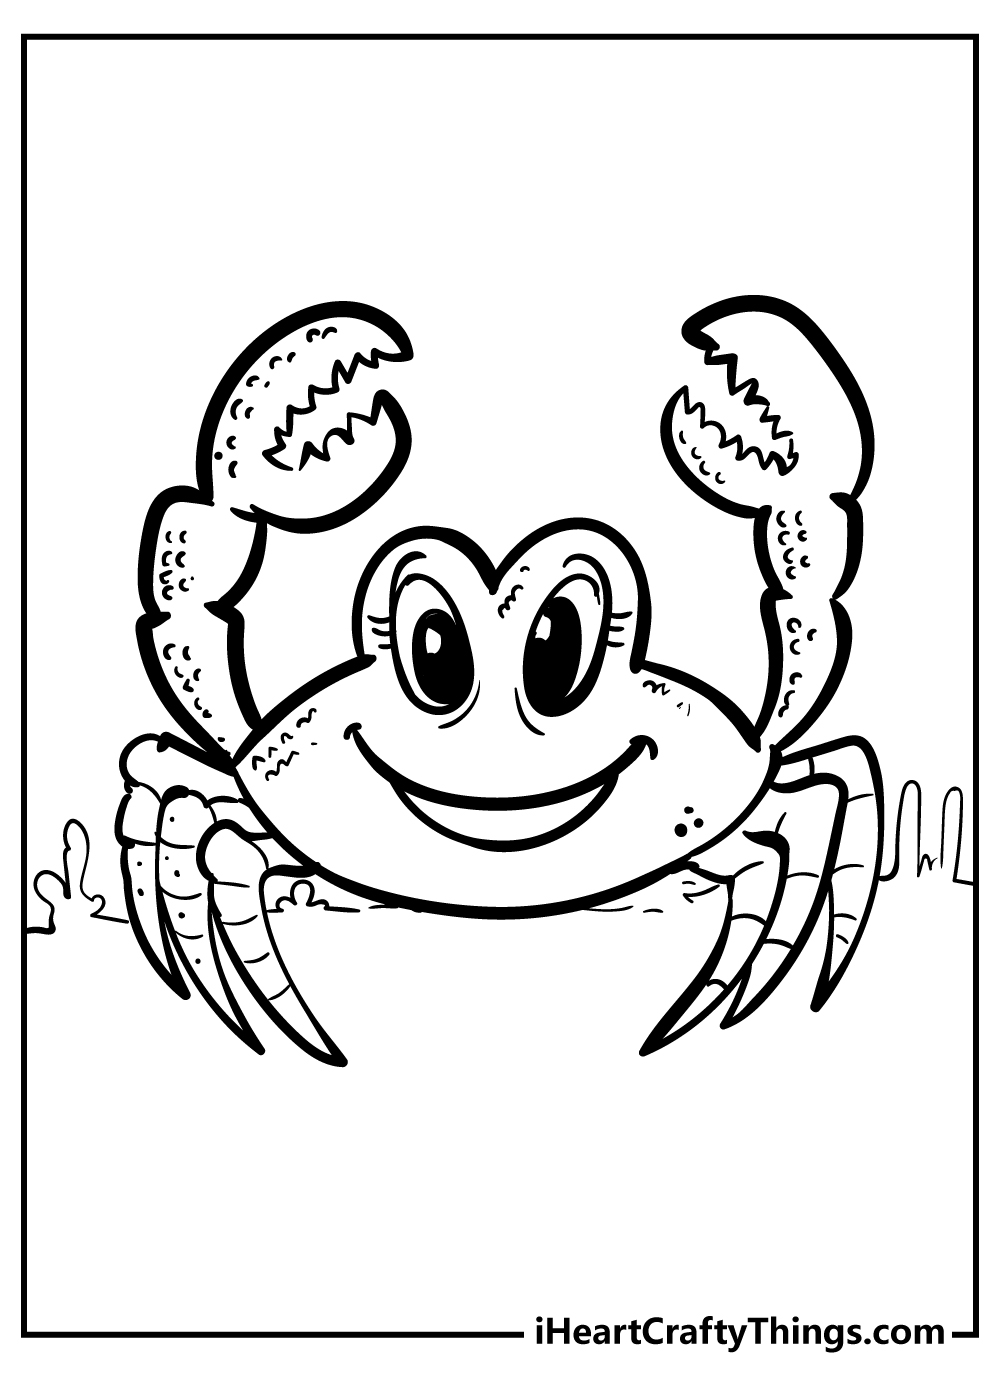 Crab Coloring Pages free pdf download